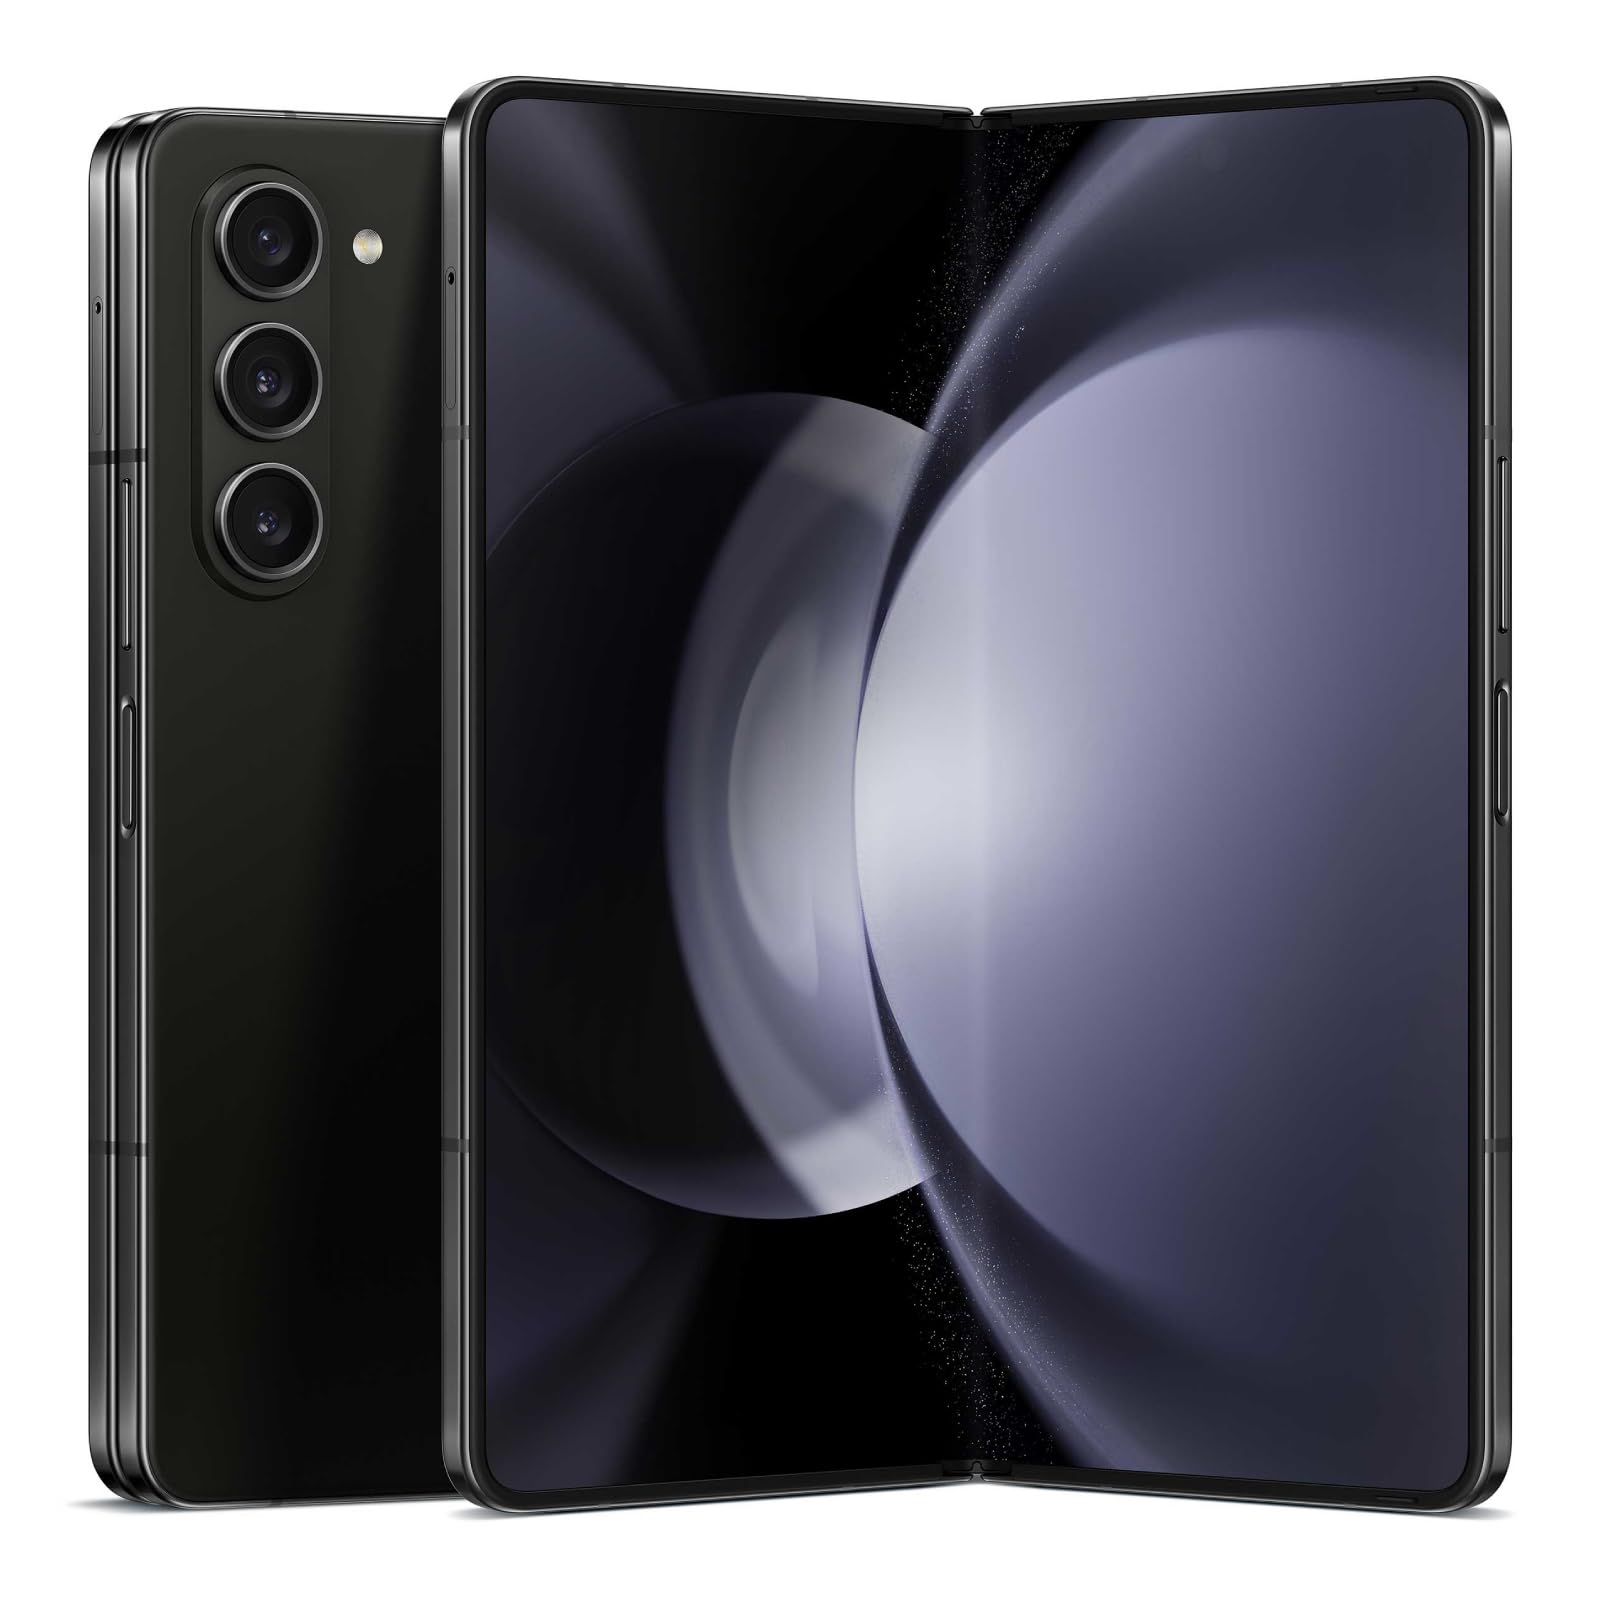 SAMSUNG Galaxy Z Fold 5 Factory Unlocked, 256GB, All non-exclusive colors $1499.99